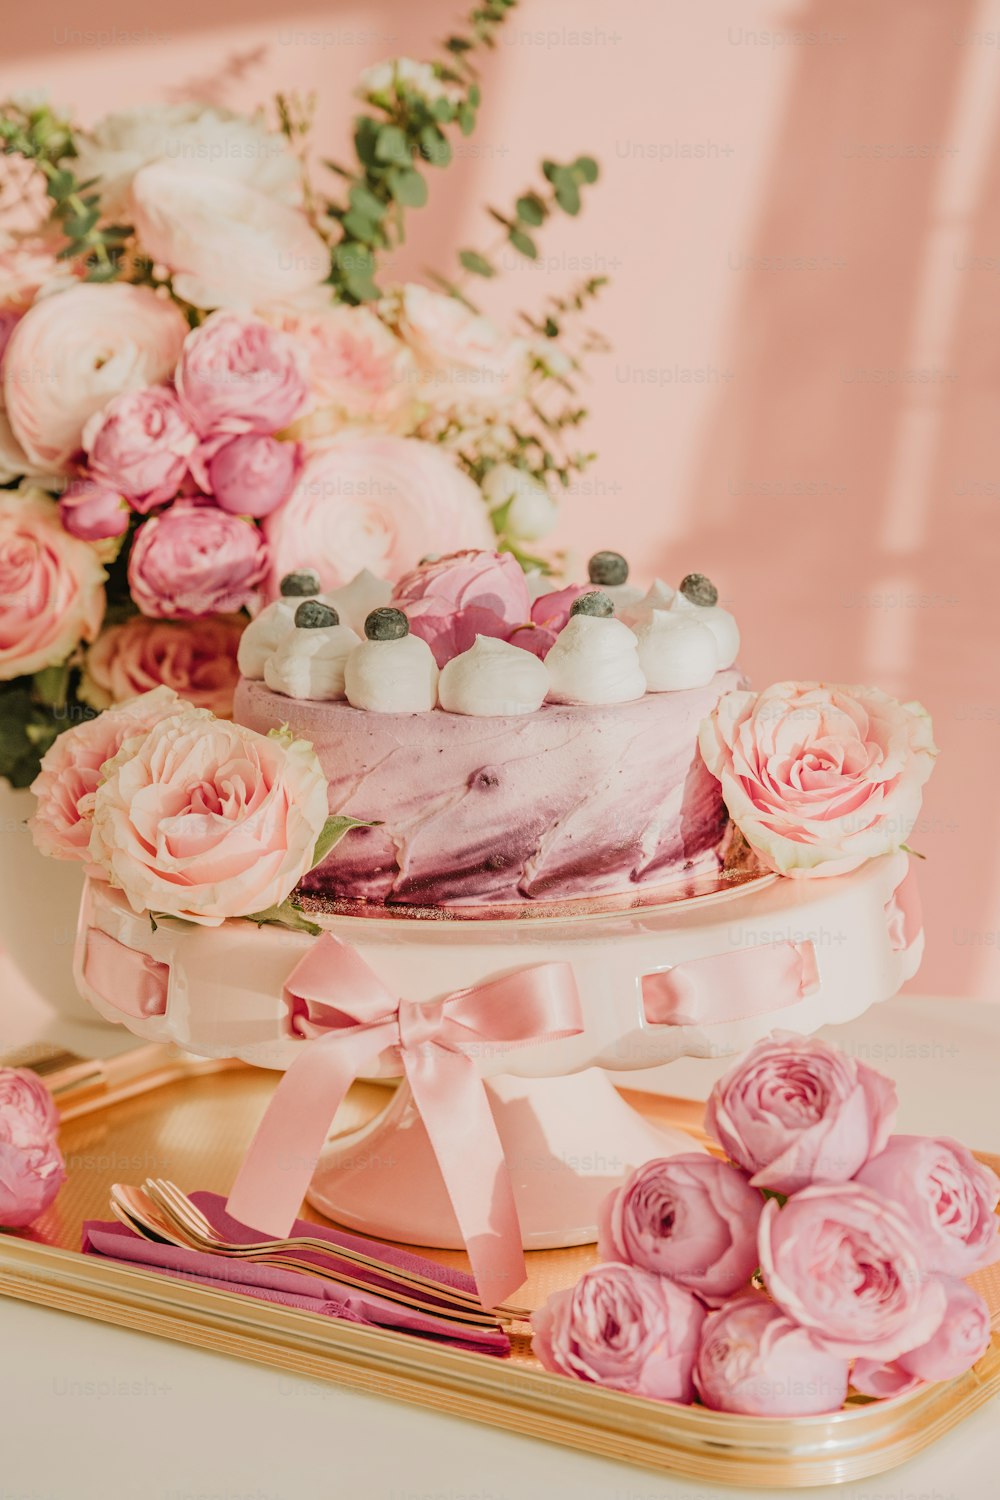 a close up of a cake on a tray with flowers